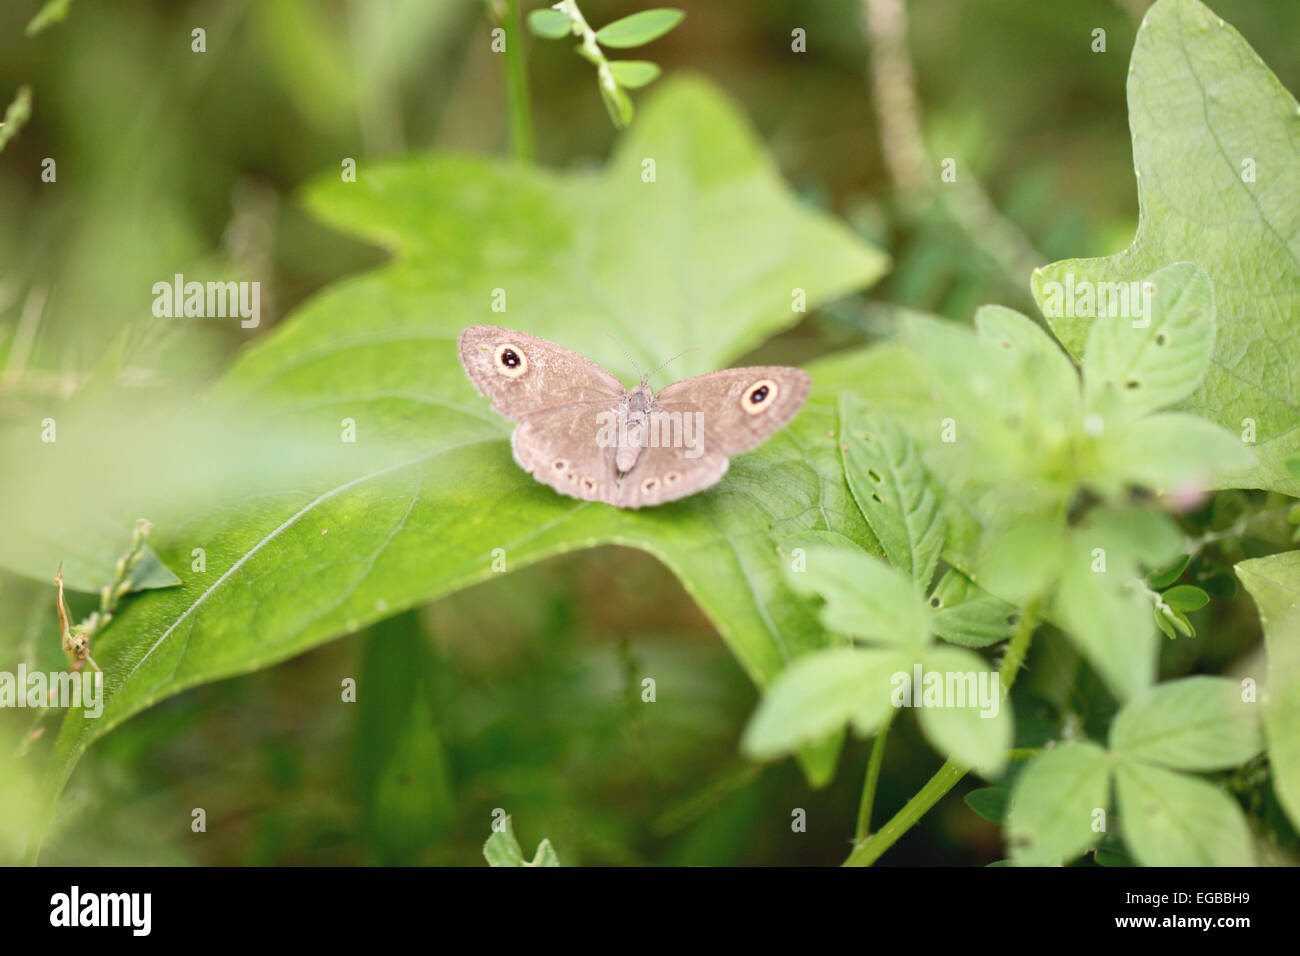 Brown butterfly on green leaves in the garden. Stock Photo